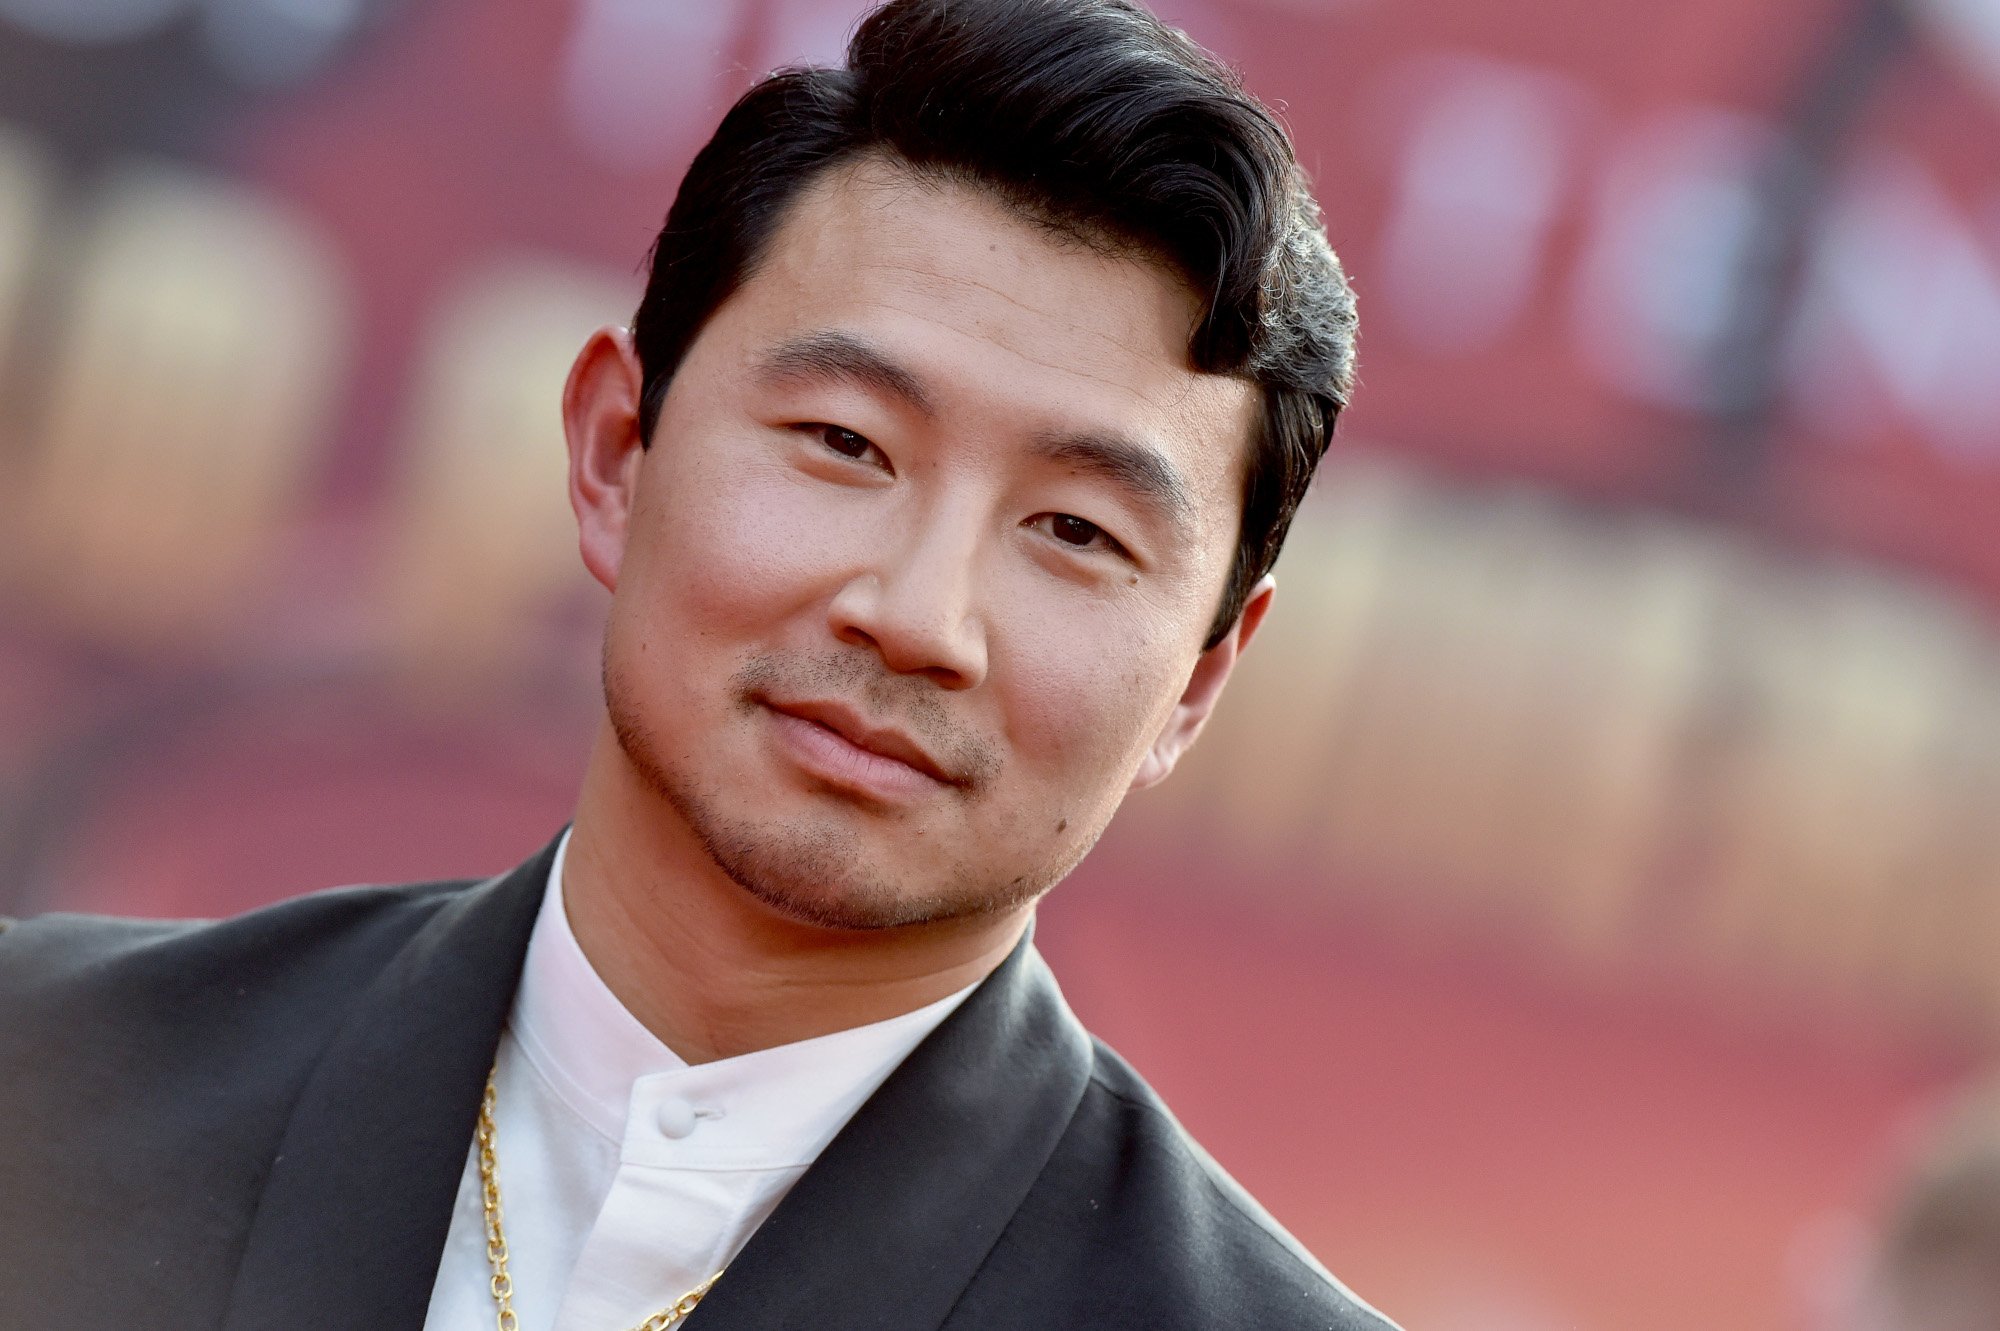 'Shang-Chi' star Simu Liu. He's wearing a white shirt, black jacket, and golden chain. He's smiling at the camera, and a blurred red wall is behind him. This photo is for our article questioning, when is 'Shang-Chi' coming to Disney+?